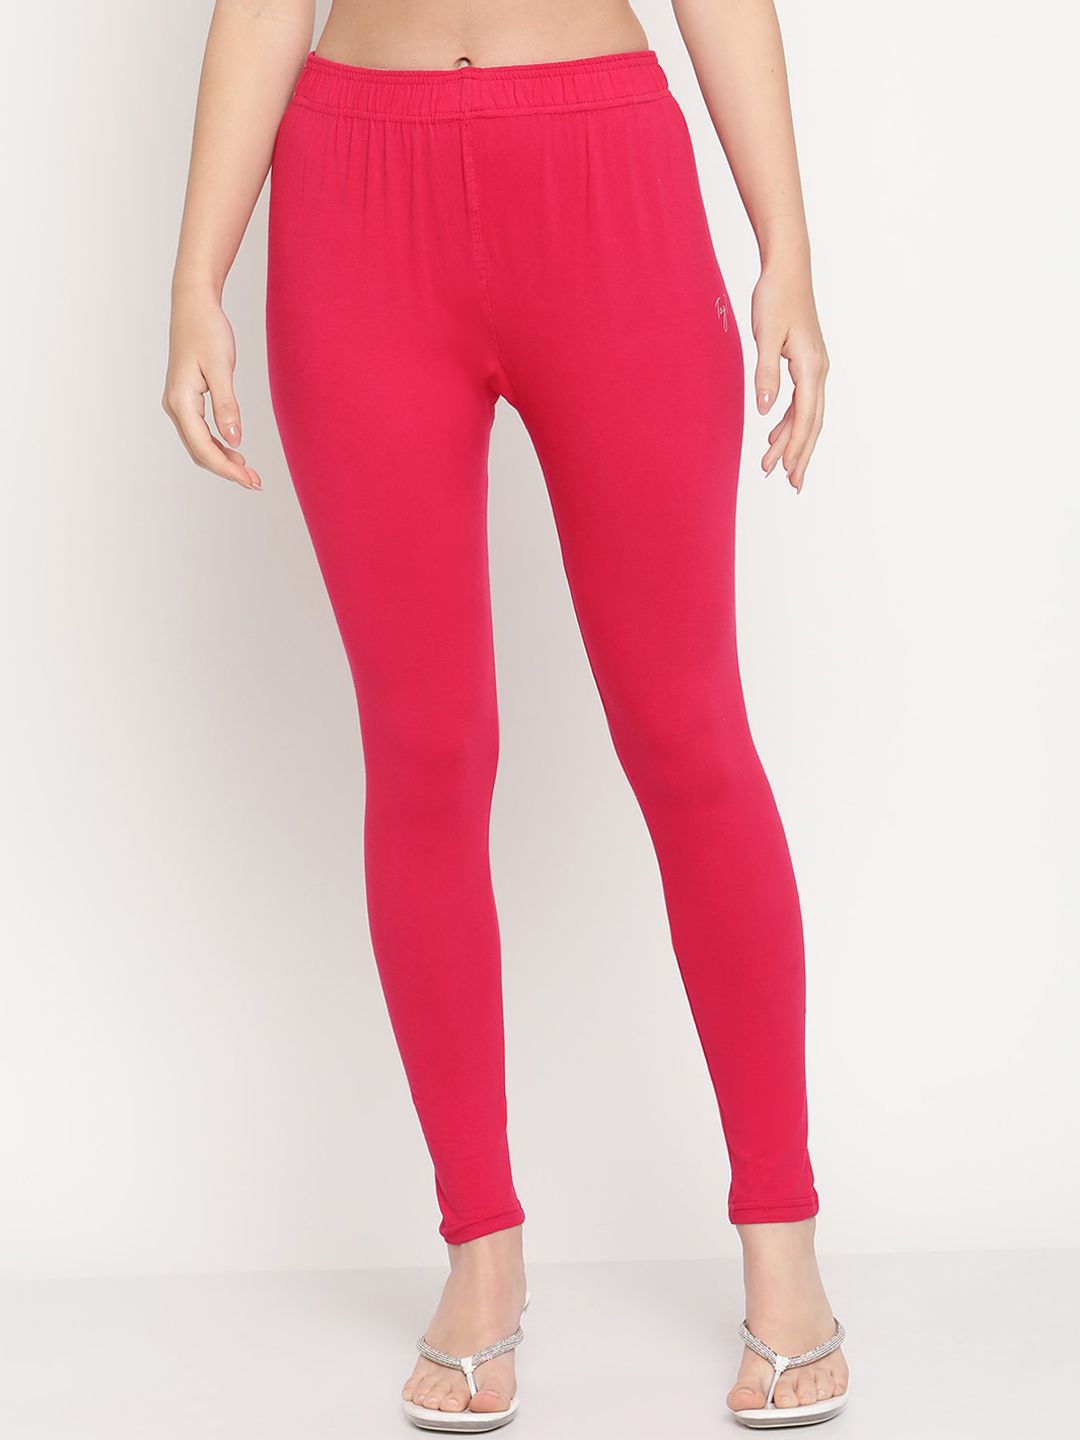 TAG 7 Women Pink Solid Ankle-Length Leggings Price in India